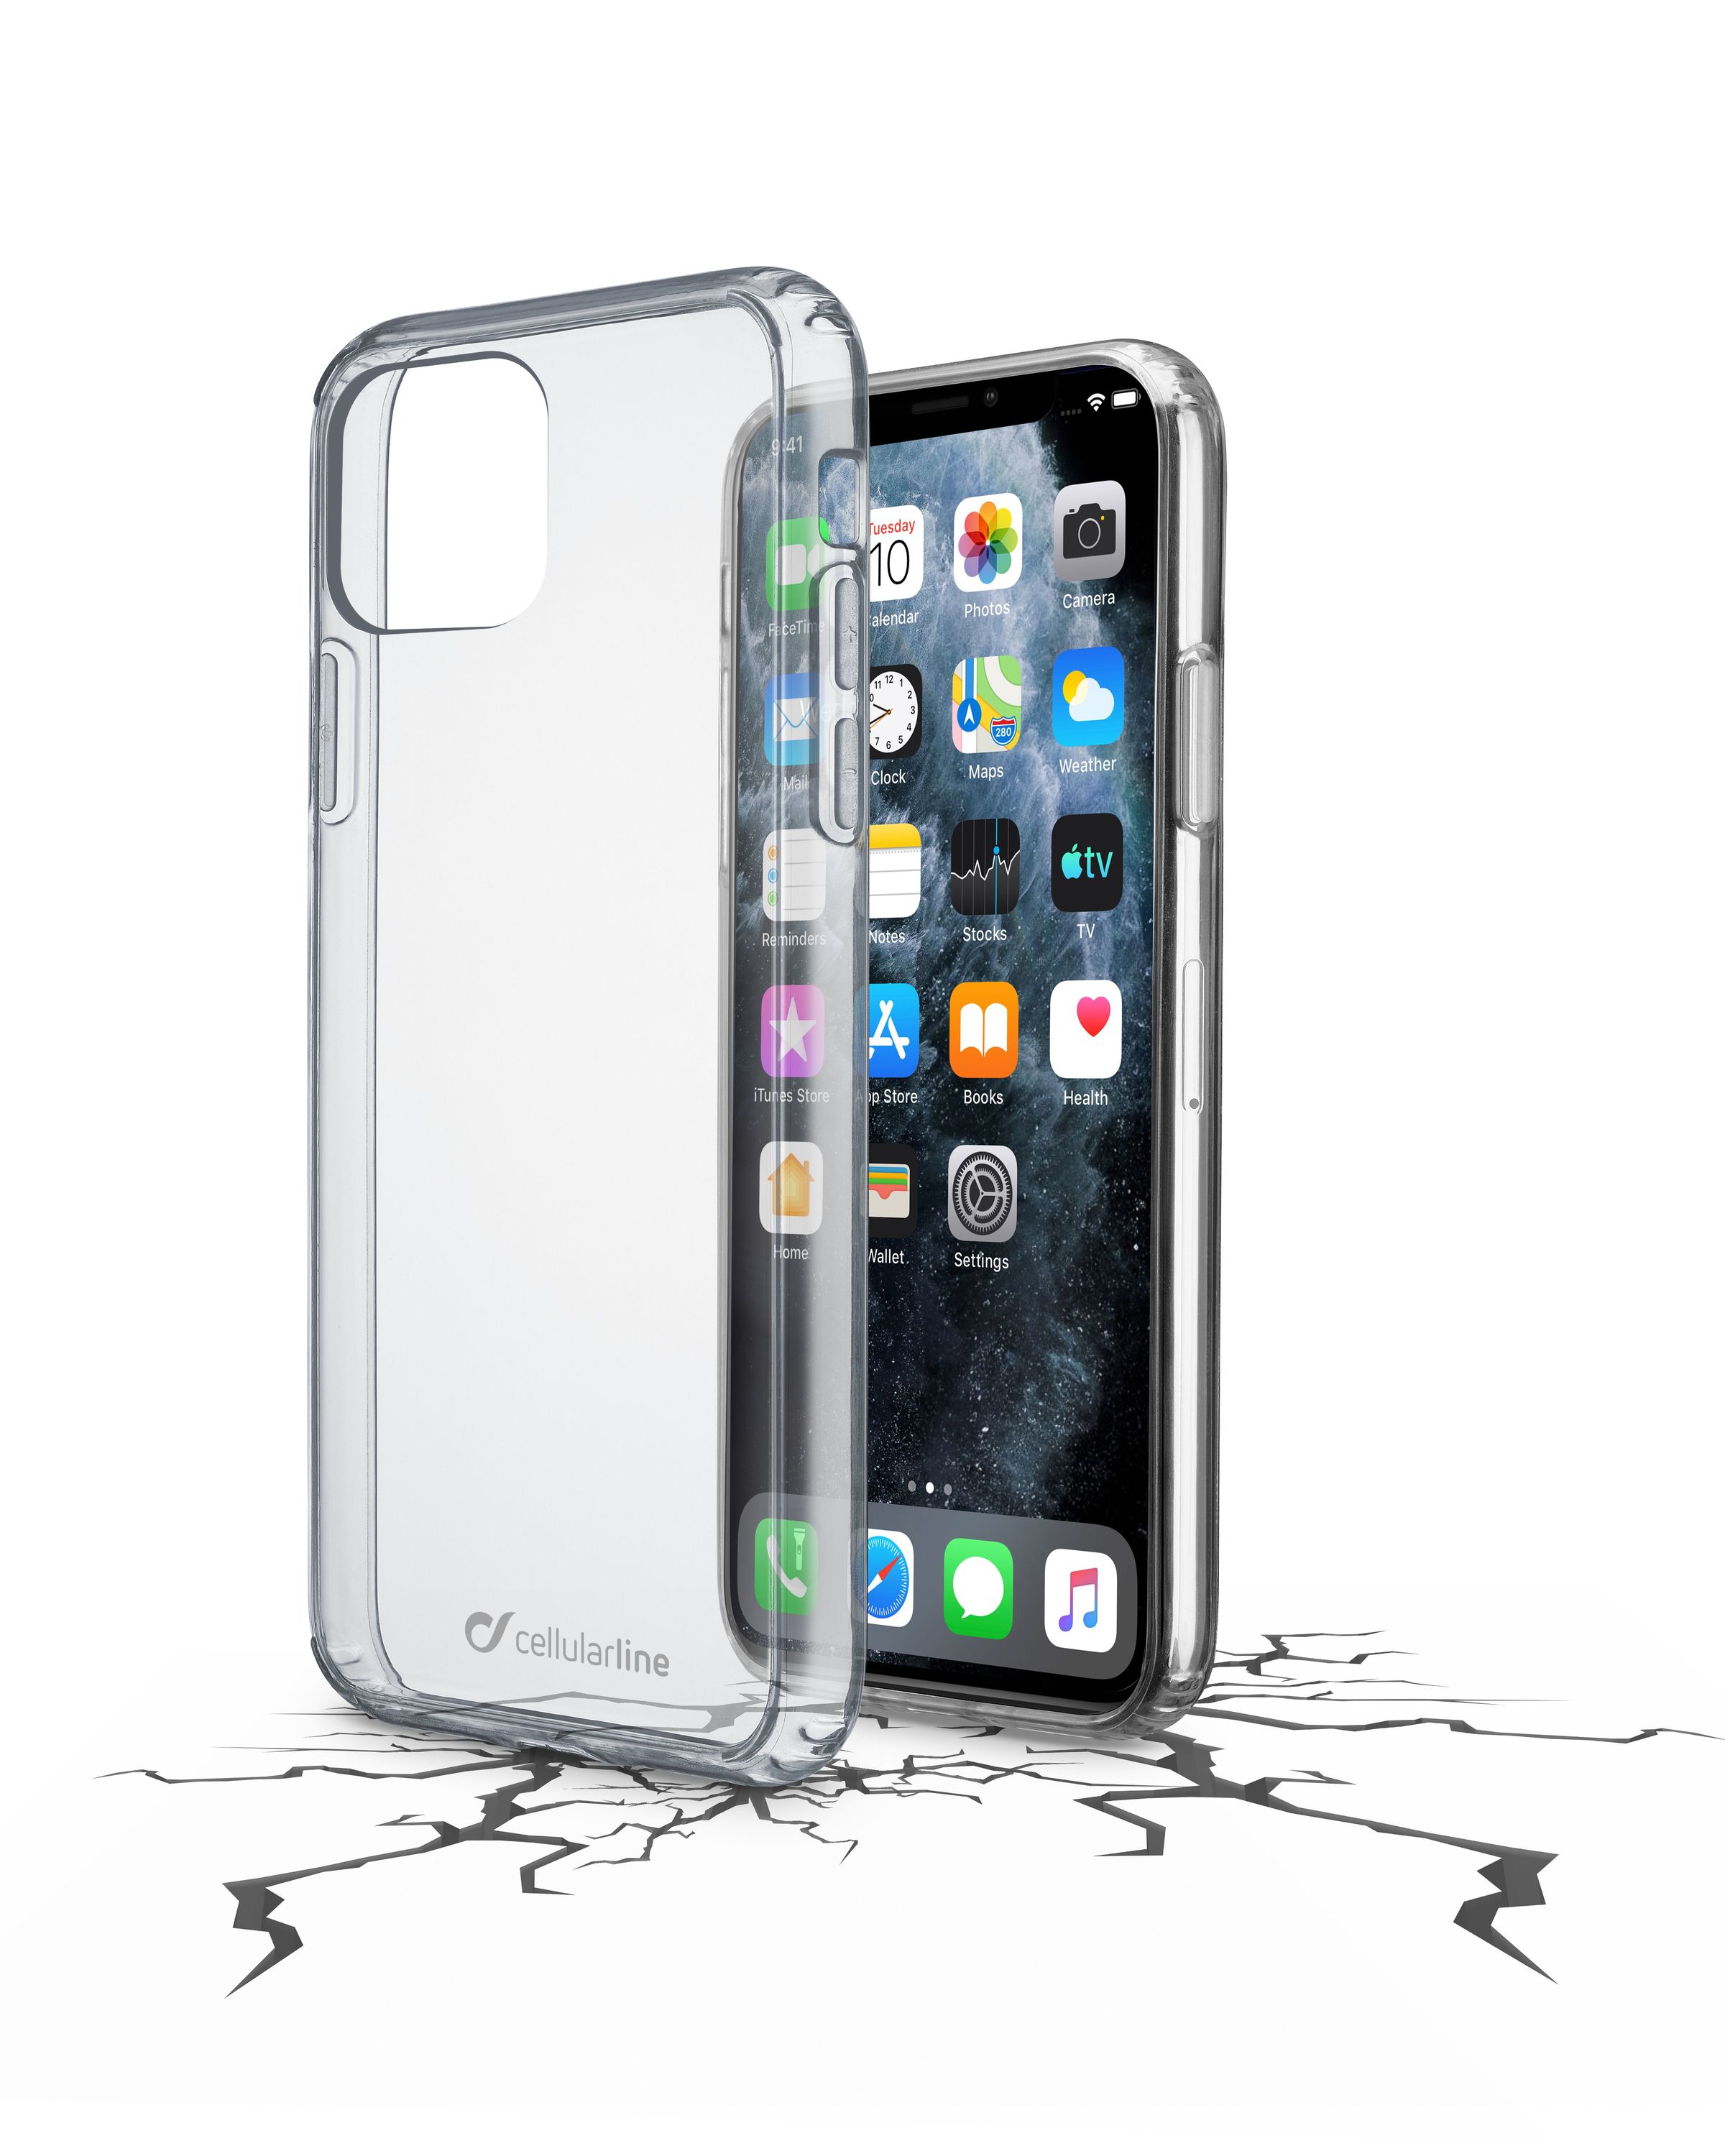 iPhone 11 Pro Max, case clear duo, transparent